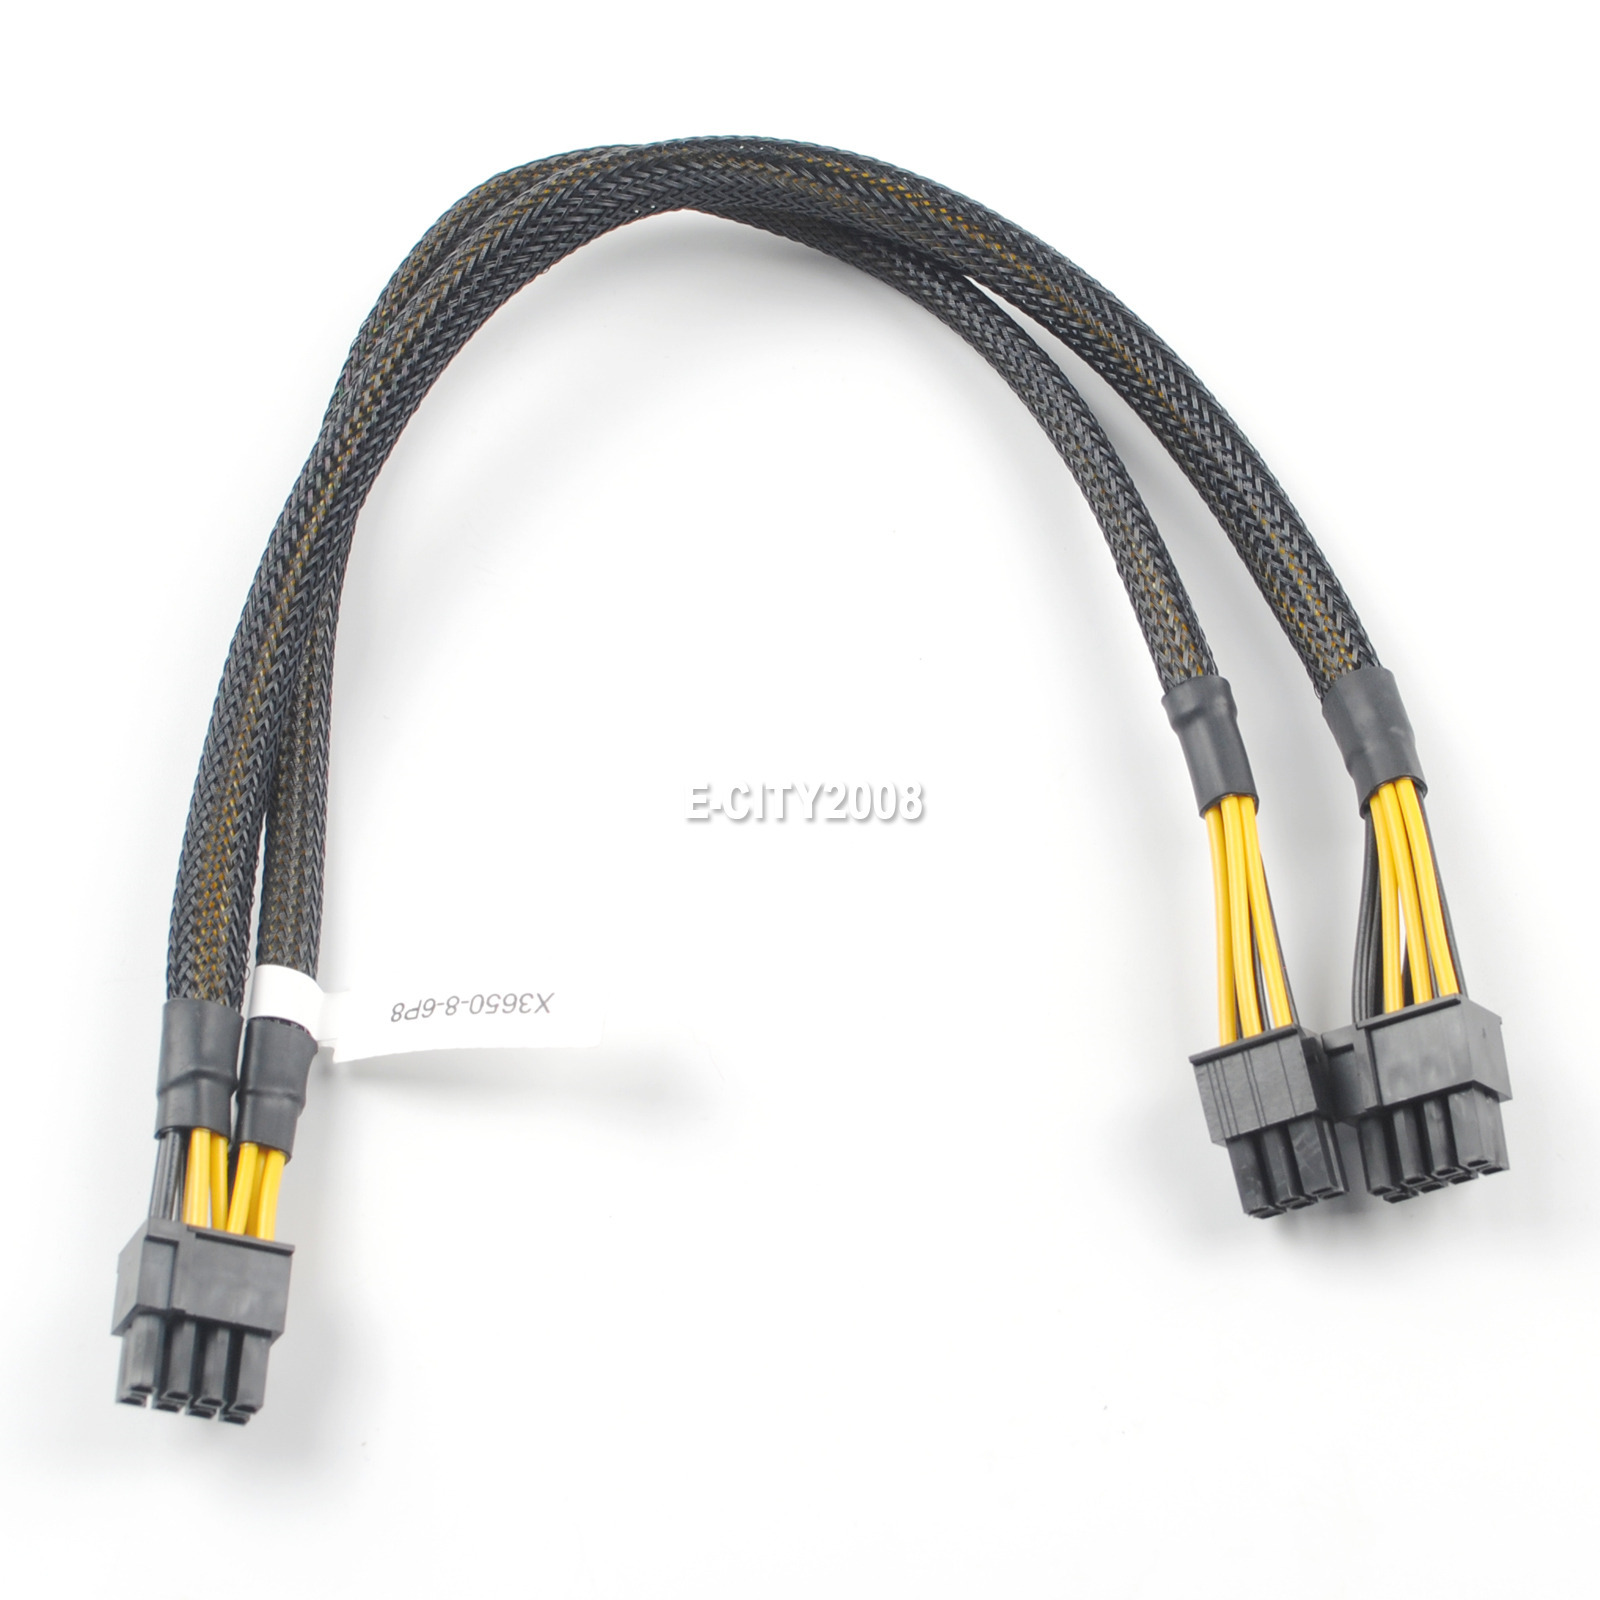 Primary image for 8Pin To 8+6Pin Power Cable For Dell T3600 And Gpu Fx4800 K4000 Video Card 35Cm